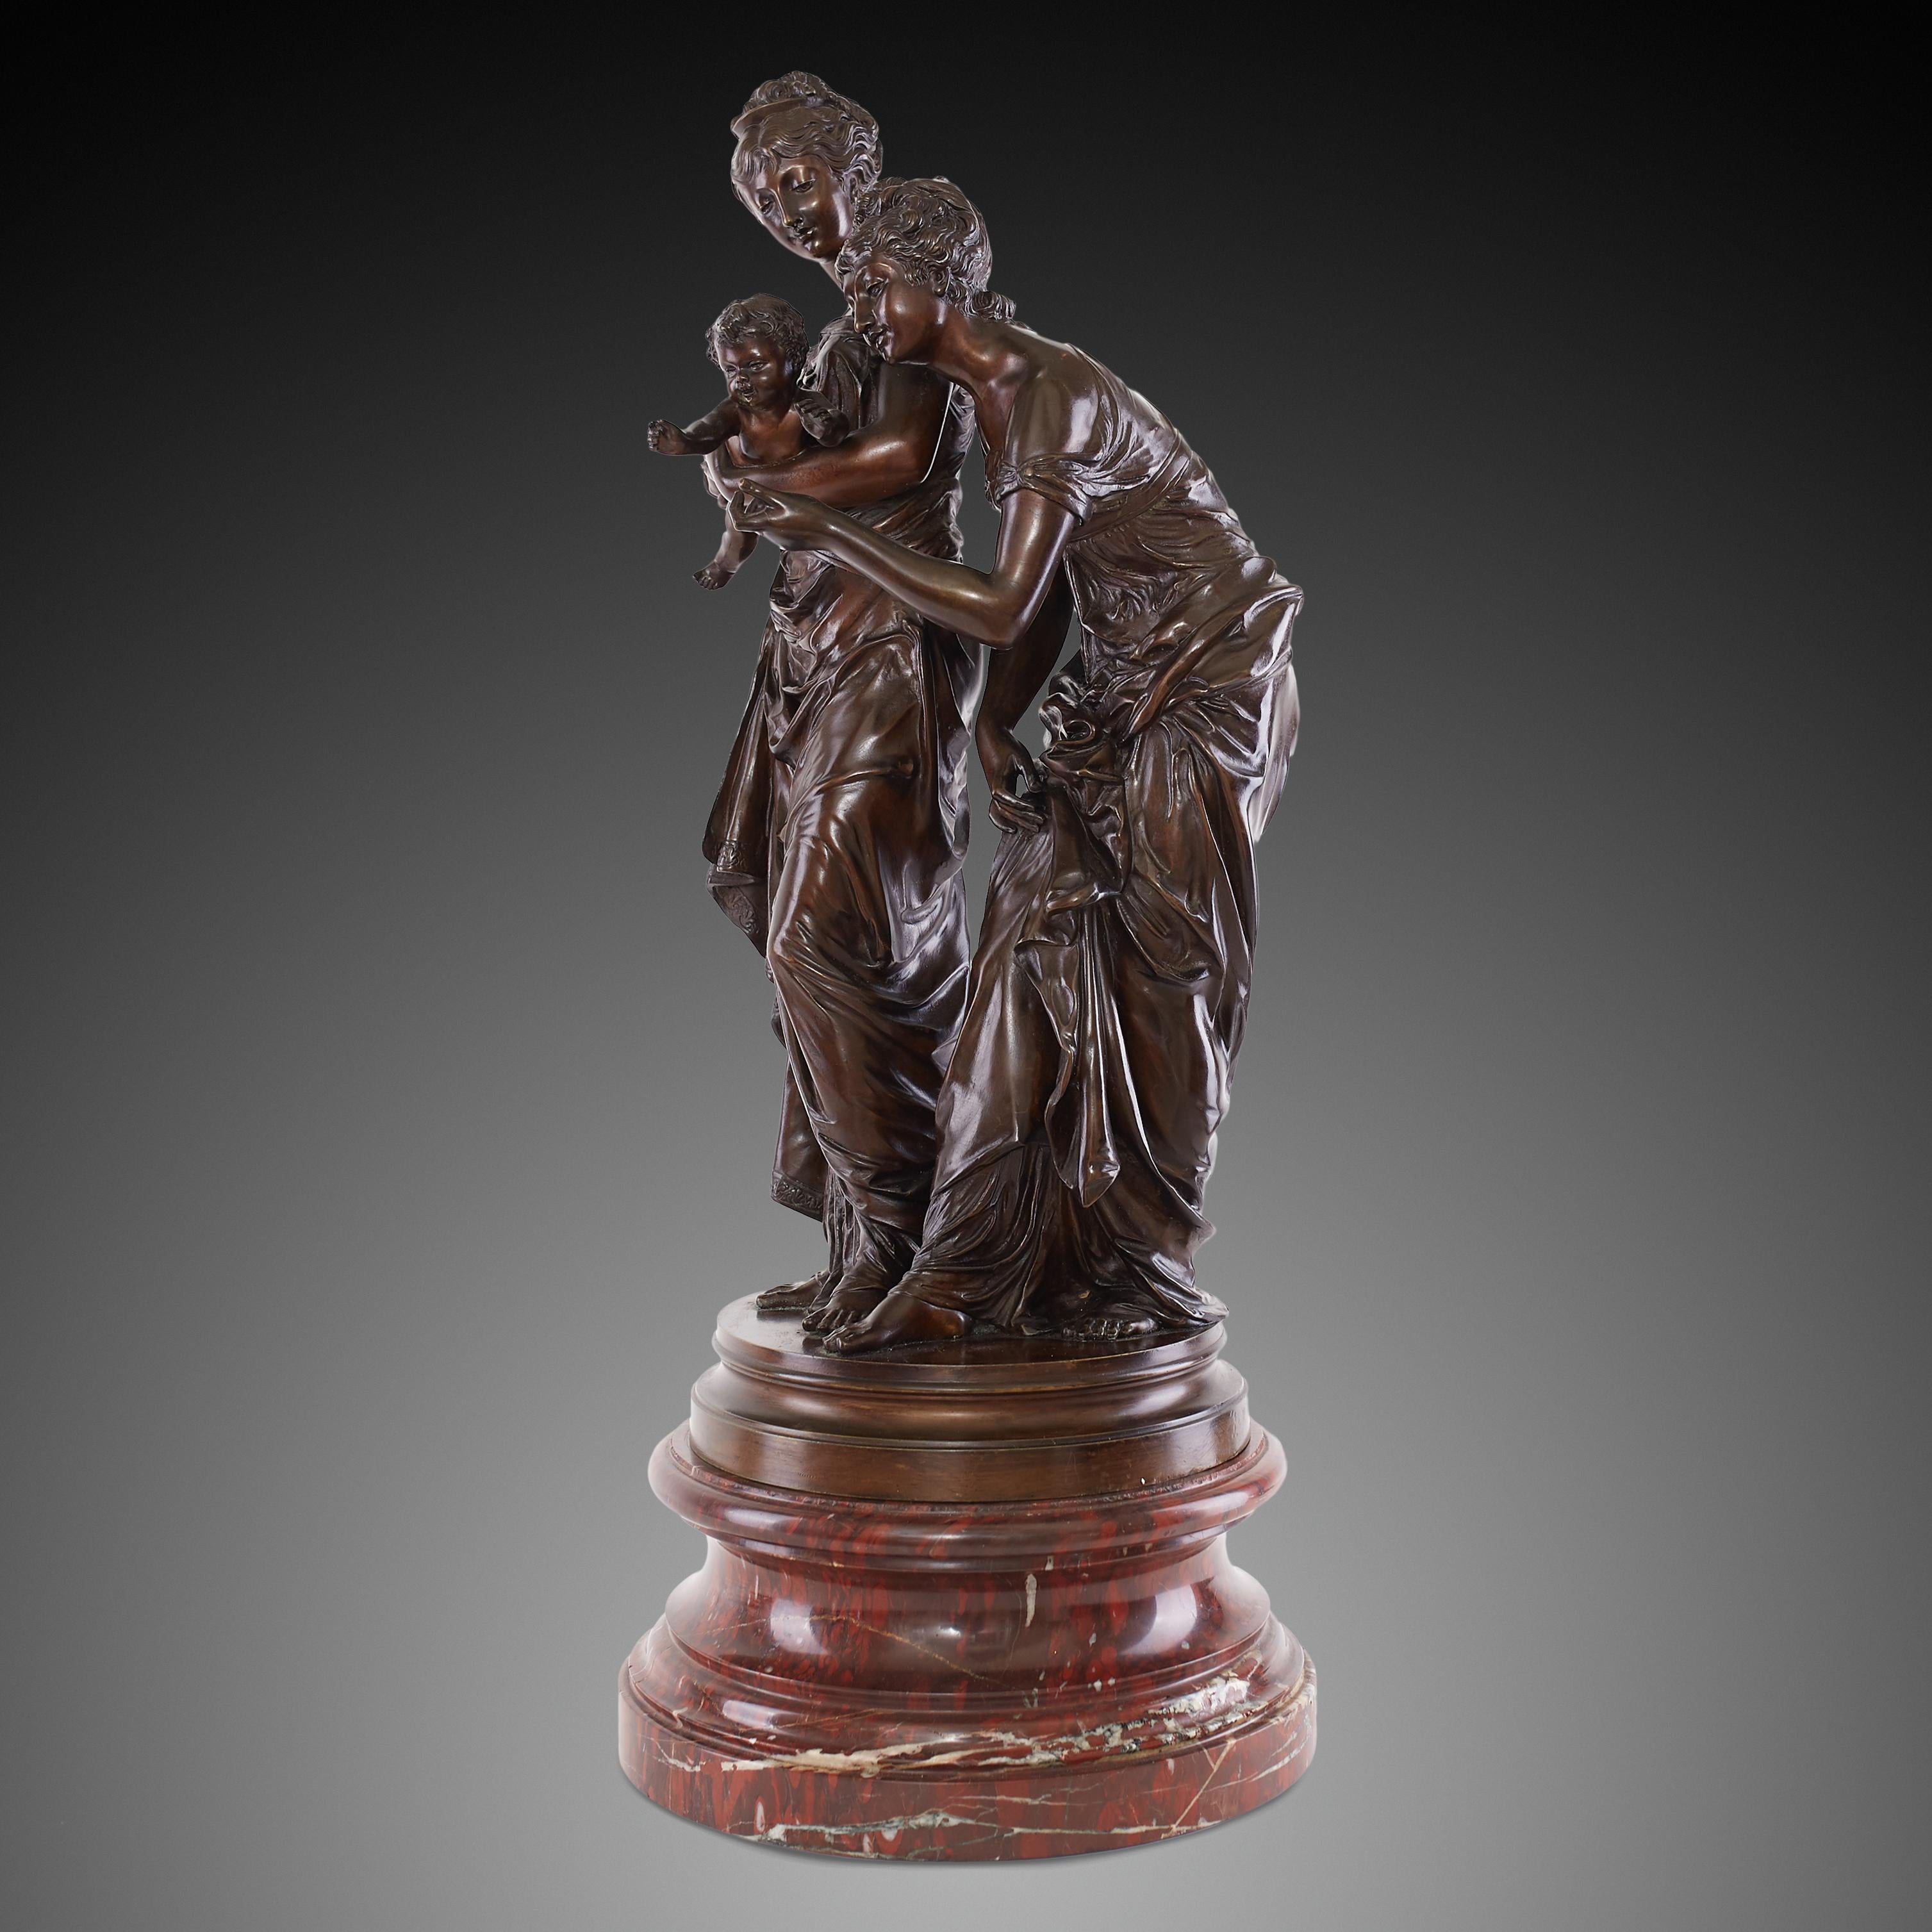 Bronze sculpture of two women with a child from the 19th century with an inscription on the plaque “Salon 1887”. The three characters depicted in this statue give viewers a feeling of love for life. Two women with characteristic Victoria updo with